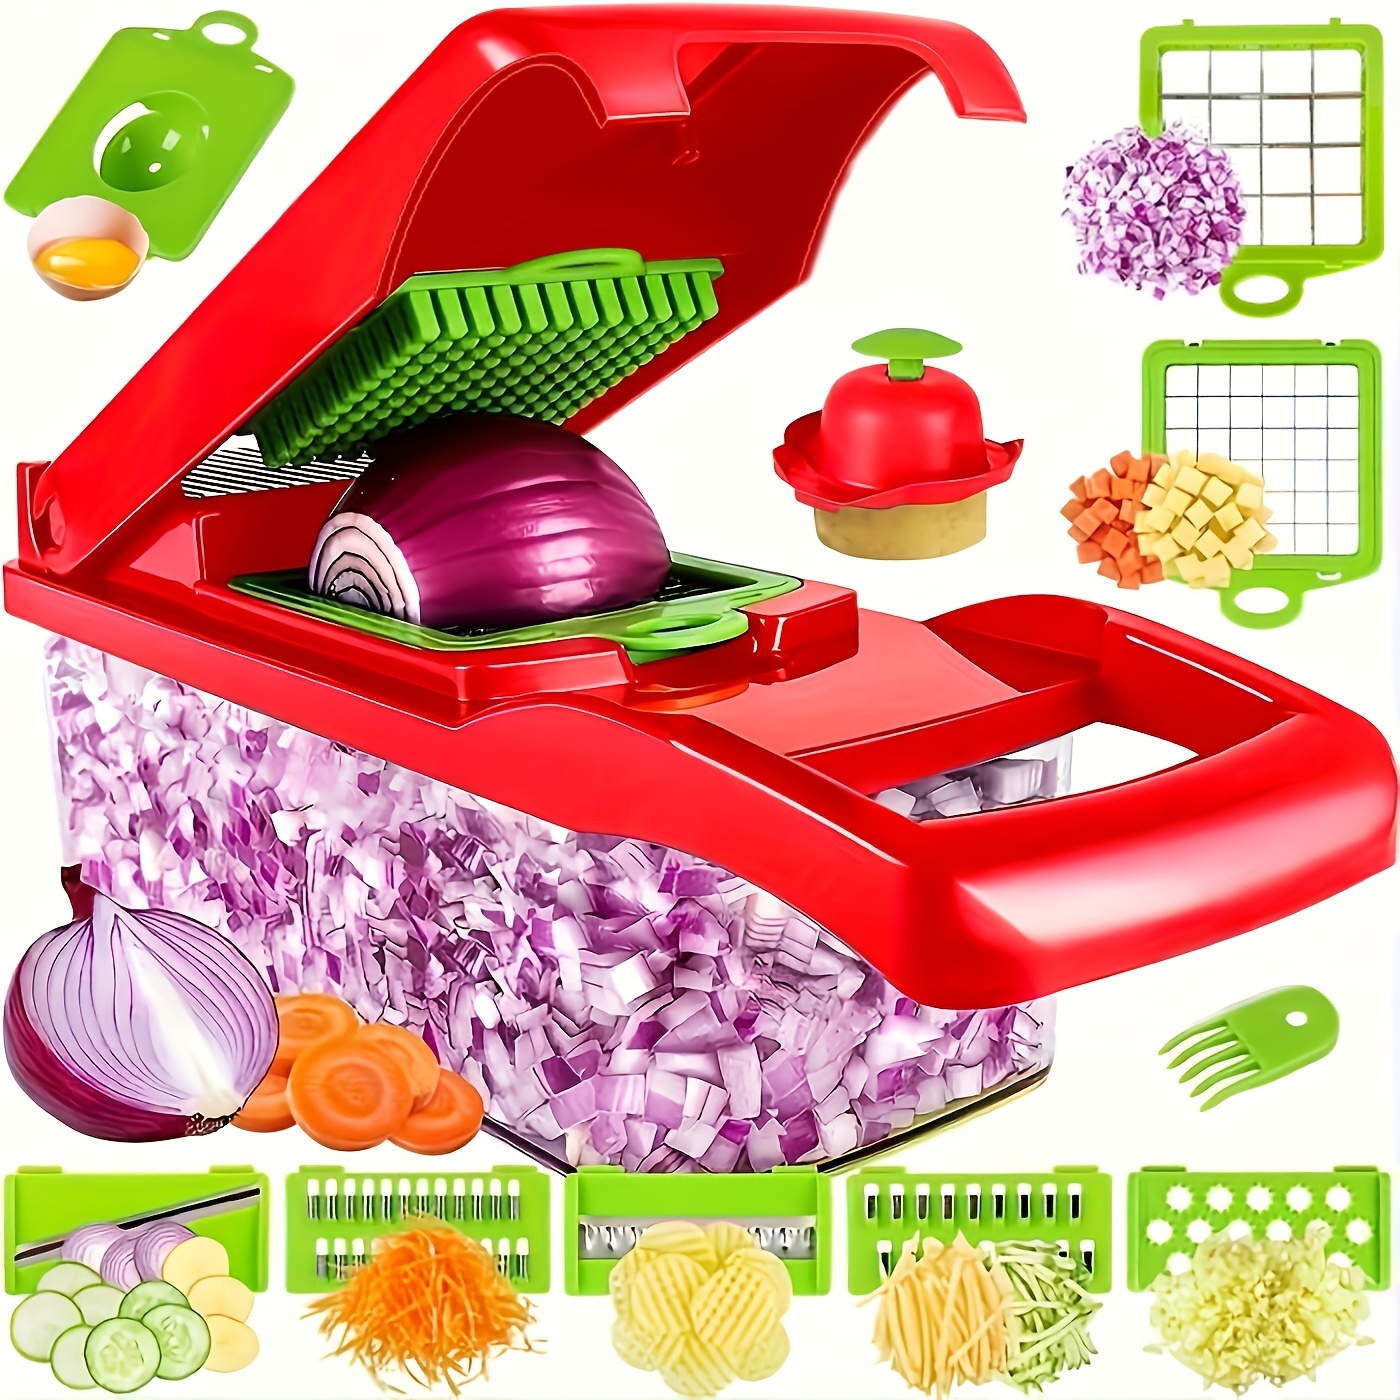 13in1 Vegetable Chopper, Multifunctional Fruit Slicer With 8blads, Manual  Food Grater, Vegetable Slicer, Cutter With Container And Hand Guard, Onion  Mincer Chopper, Household Potato Shredder, Kitchen Stuff, Kitchen Gadgets,  Dorm Essentials 